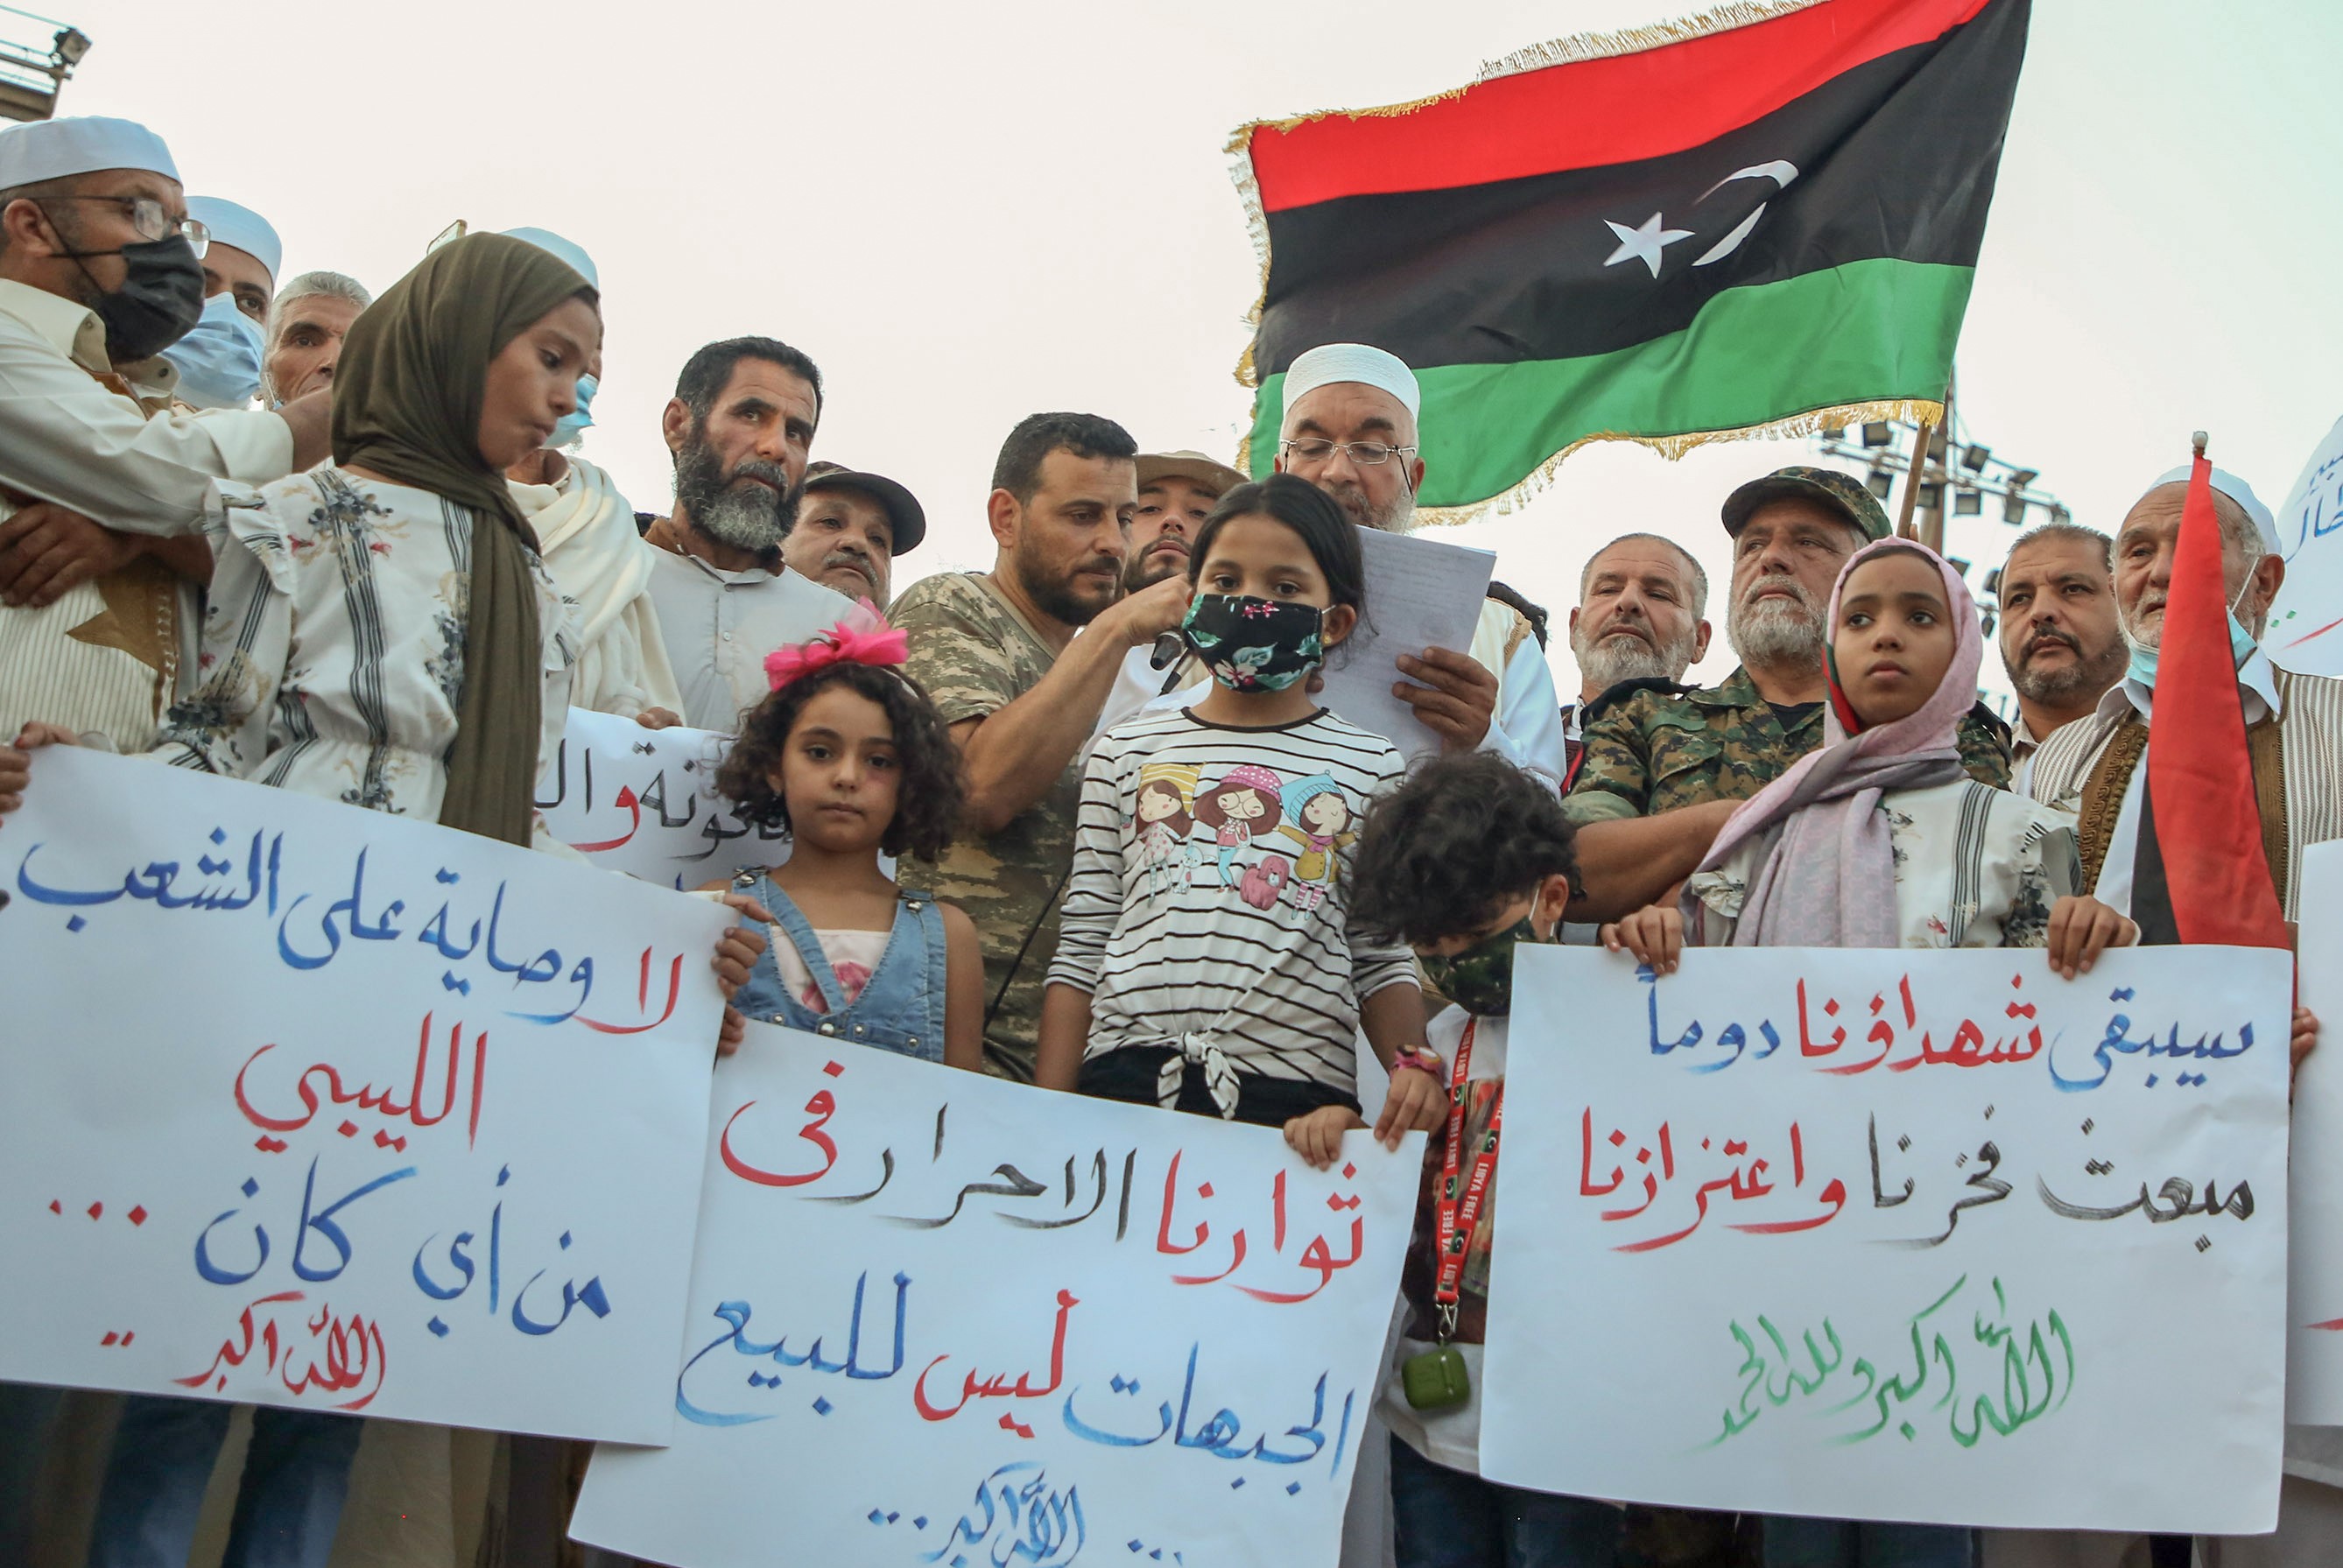 Libyan demonstrators lift placards and national flags during a rally in Martyrs Square in the capital Tripoli, to protest the deteriorating political, security, and living conditions in the country, on October 2, 2020.